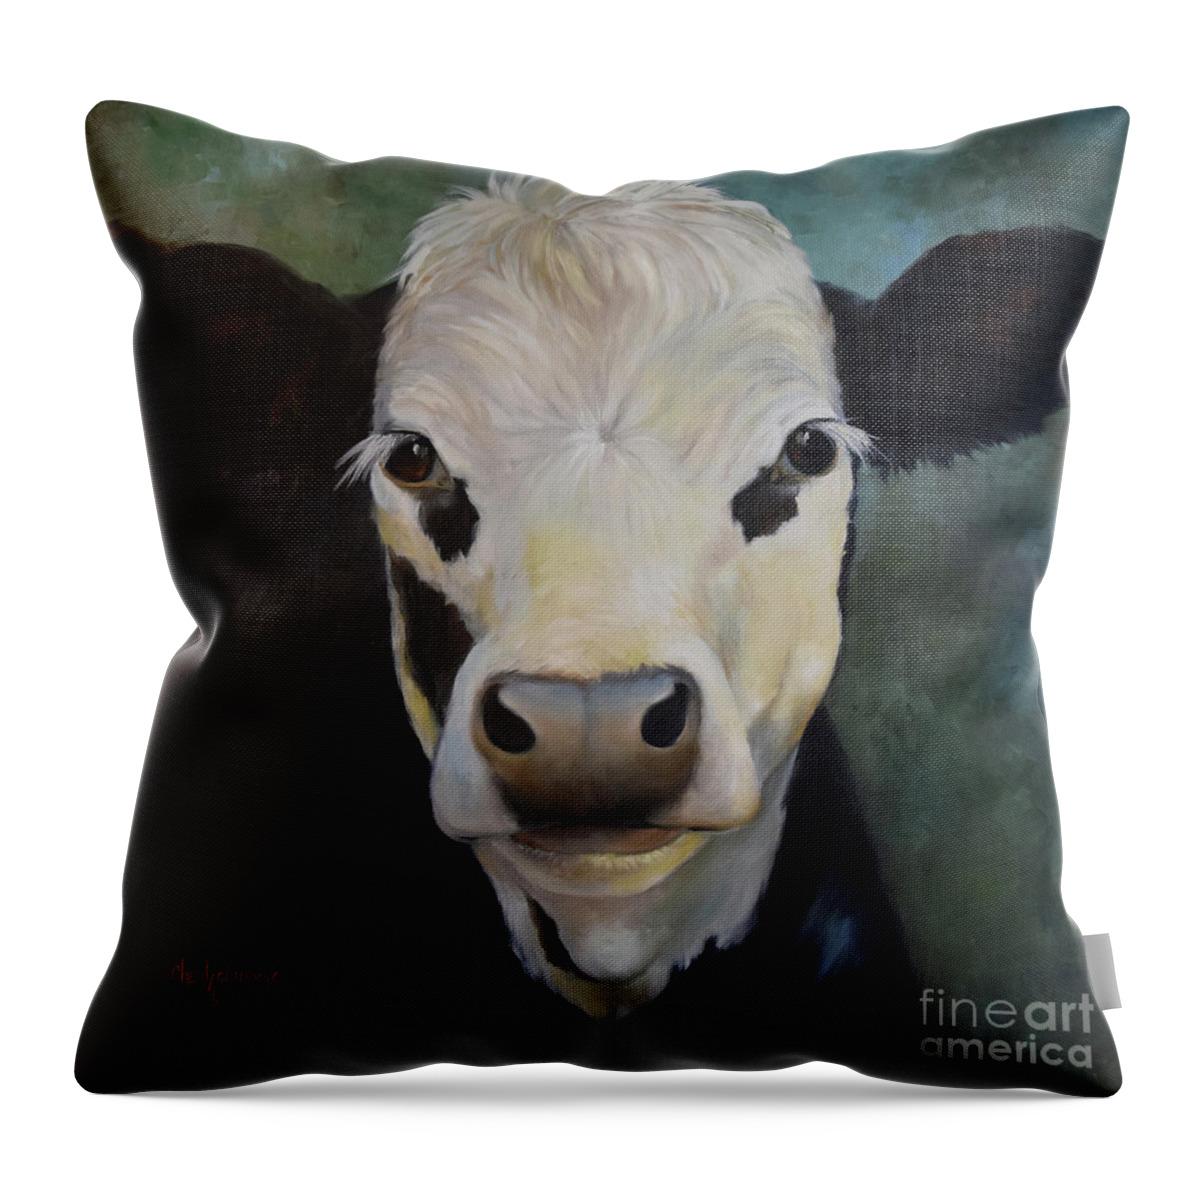 Realistic Cow Throw Pillow featuring the painting Miss Clementine by Cheri Wollenberg